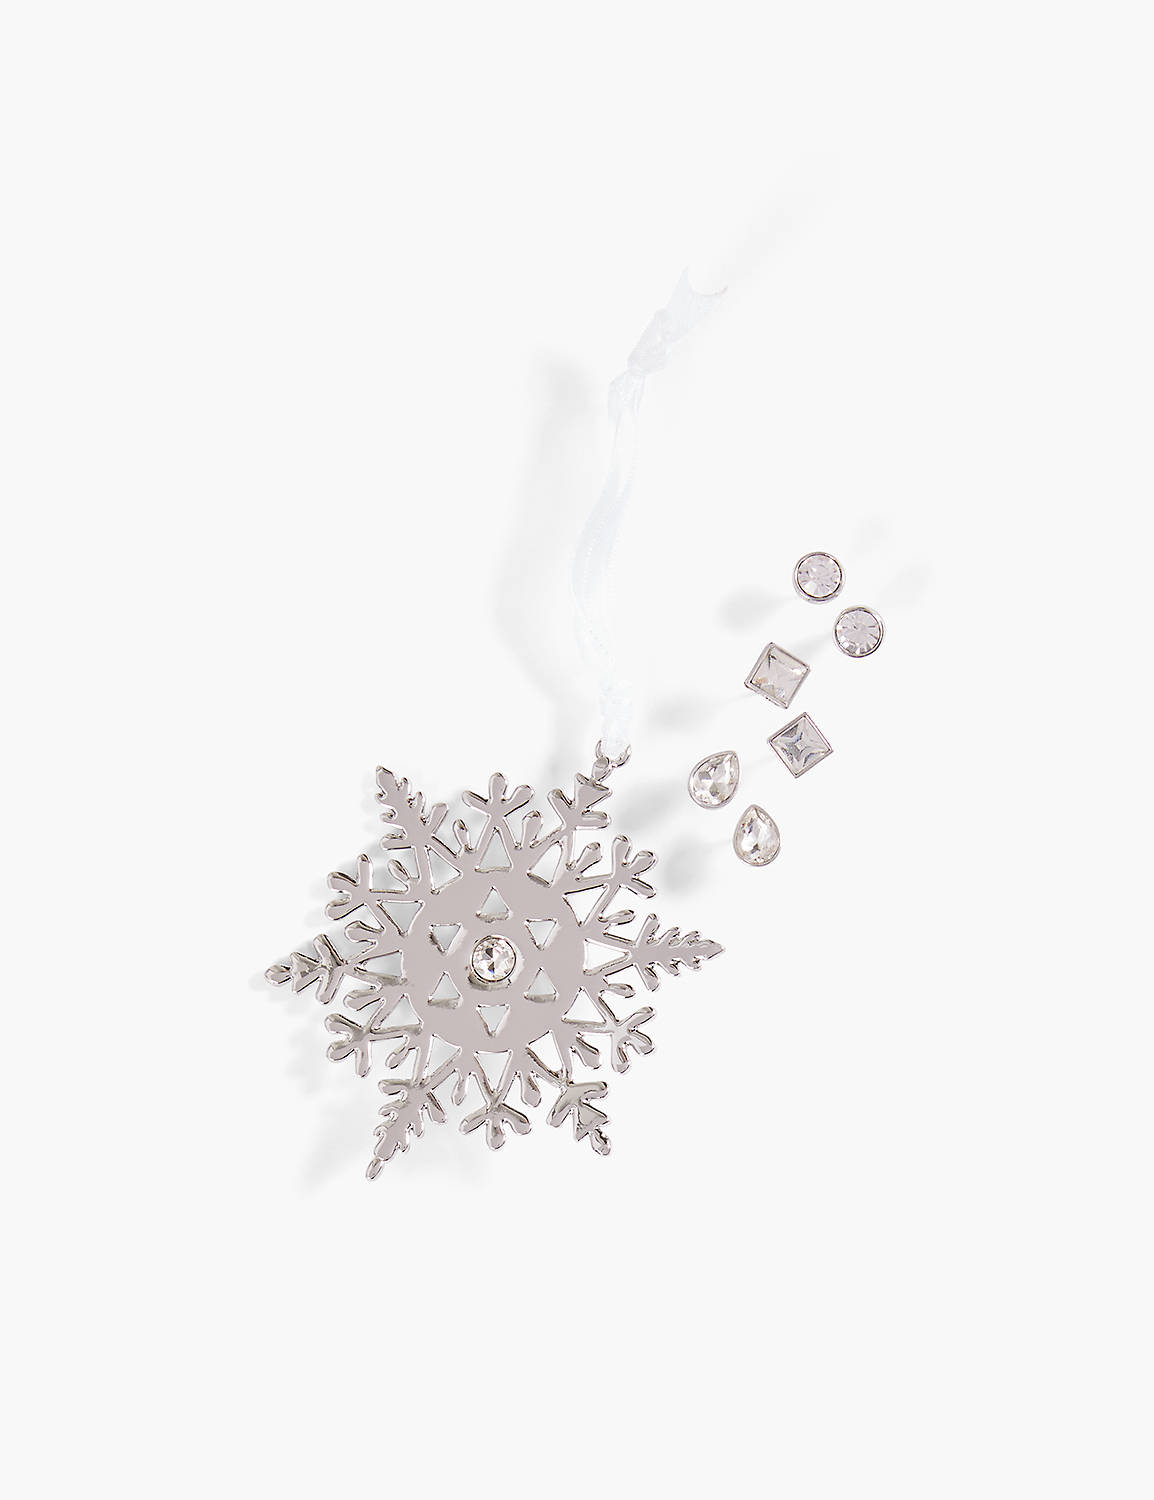 SNOWFLAKE ORNAMENT WITH 3 PK EARRIN Product Image 2